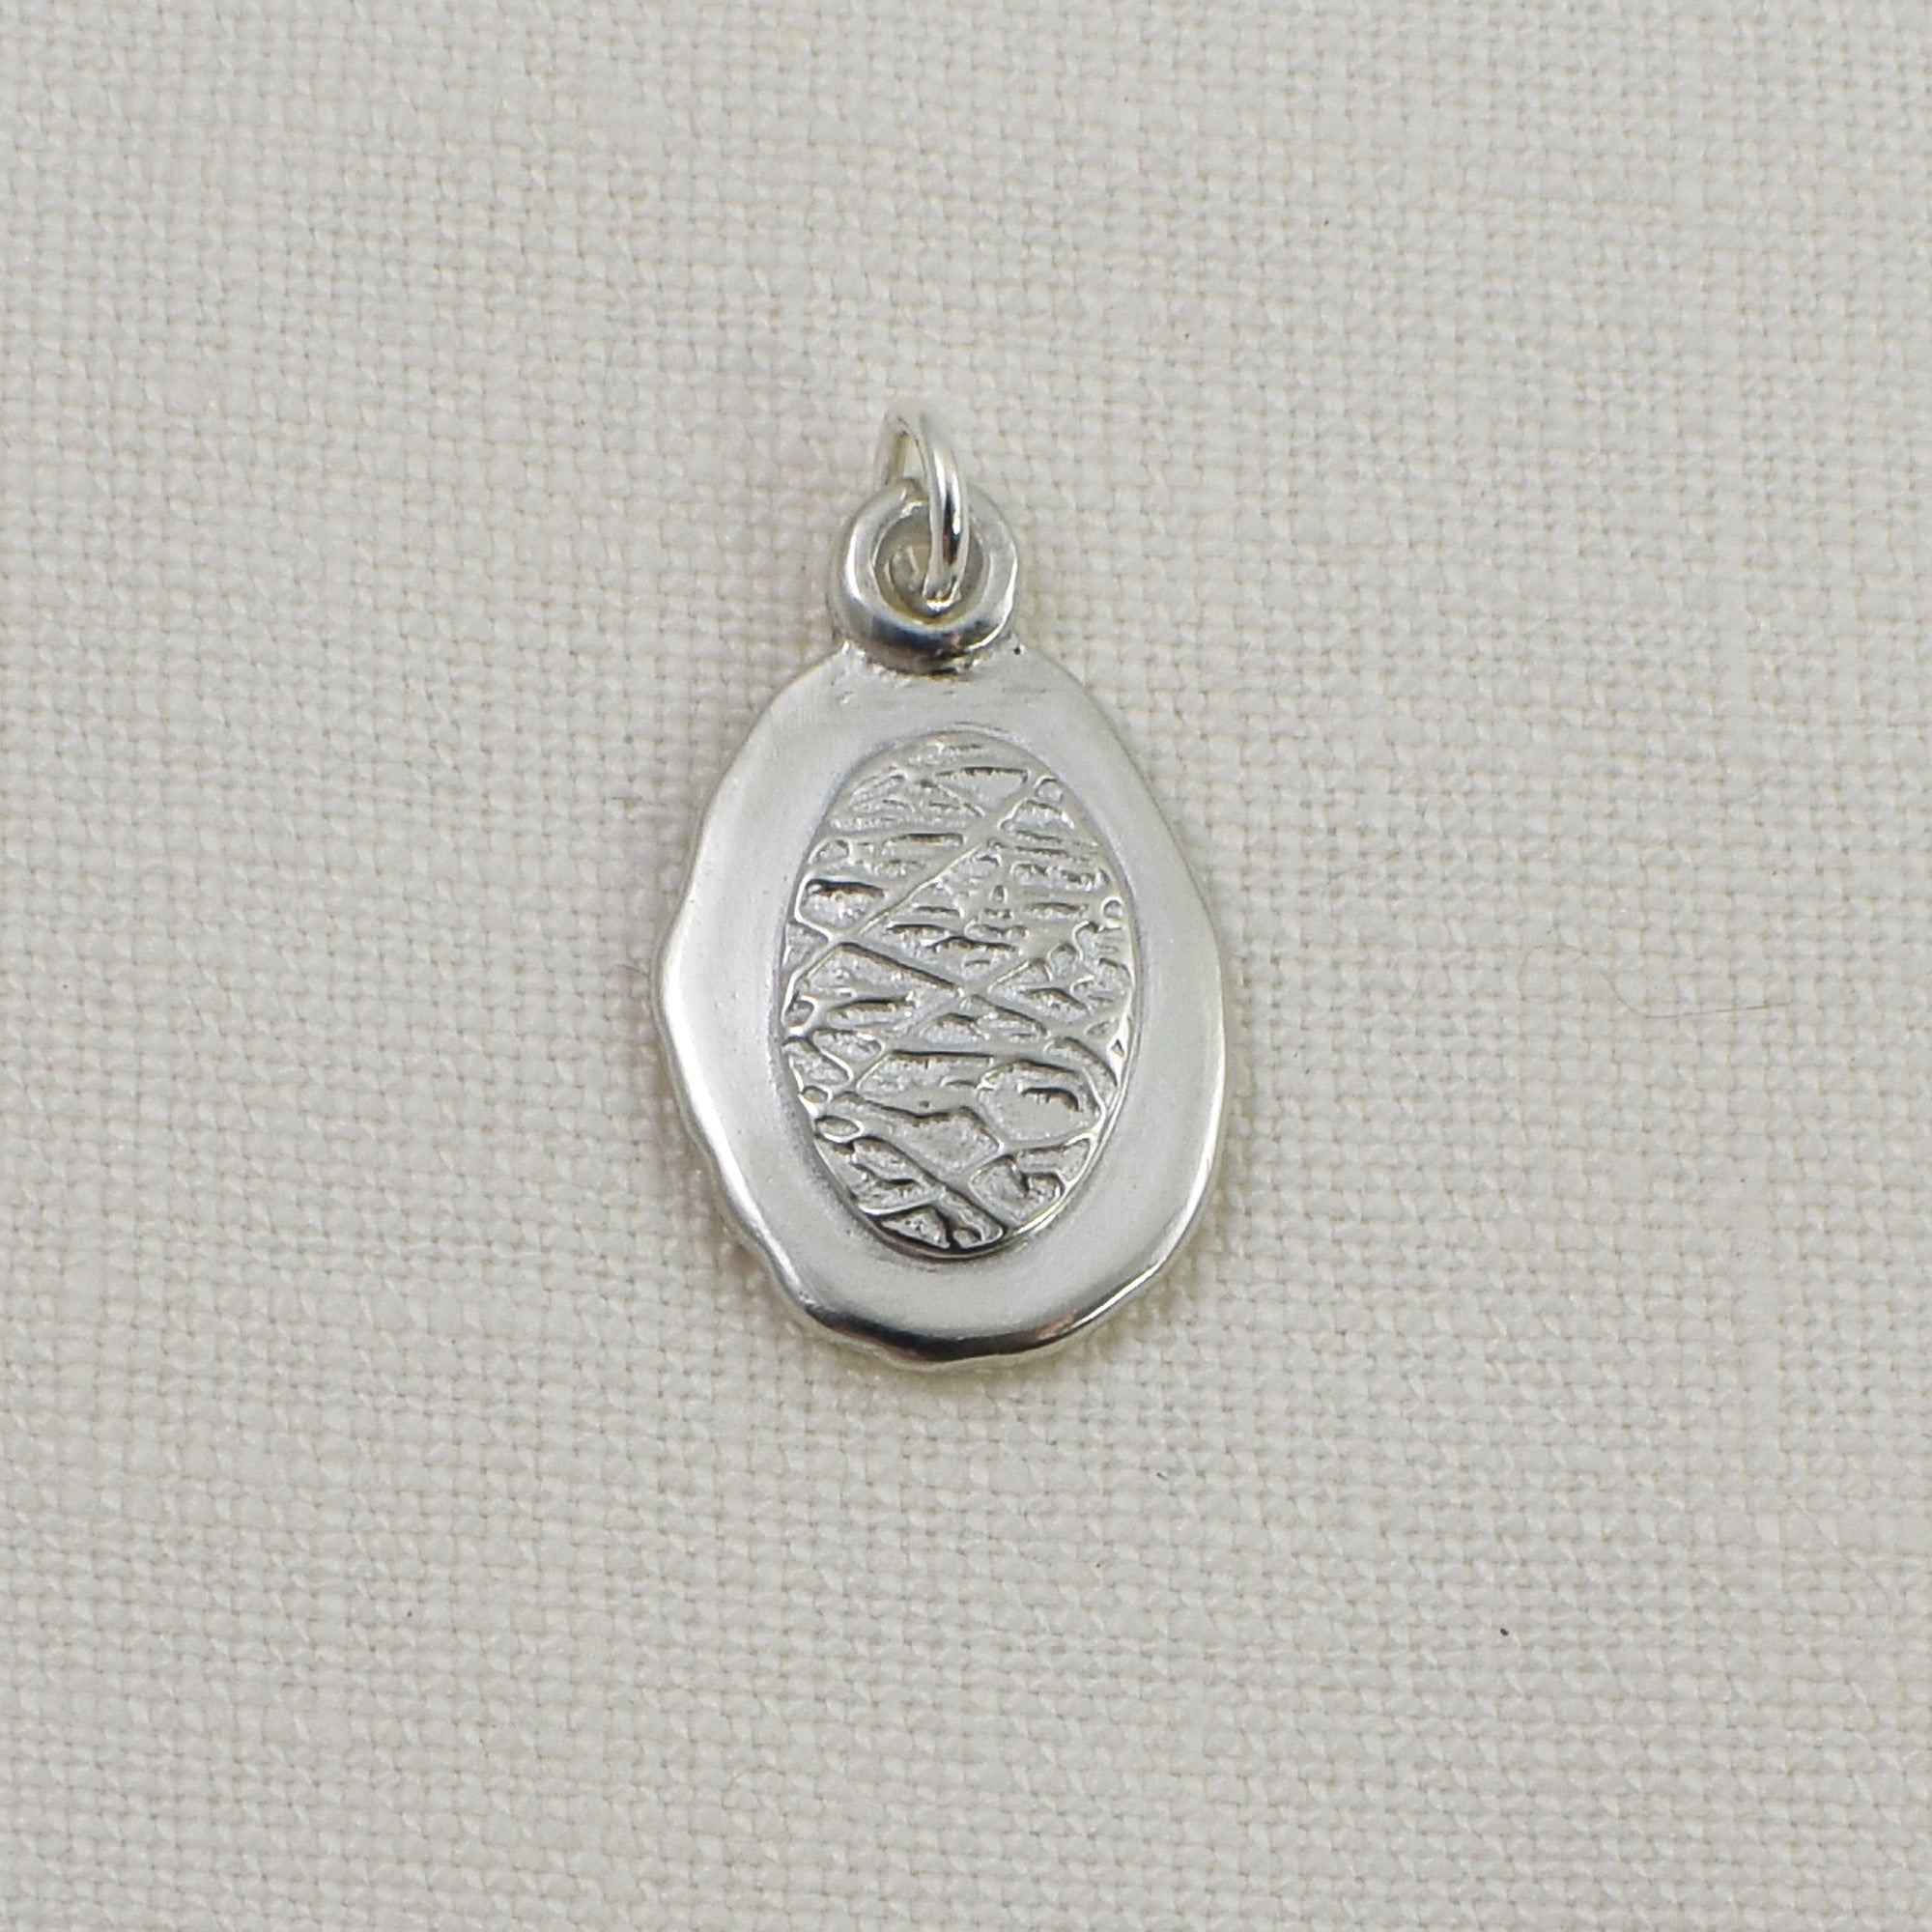 A Timeless Impression - Fingerprint Jewelry and Memorial Keepsakes